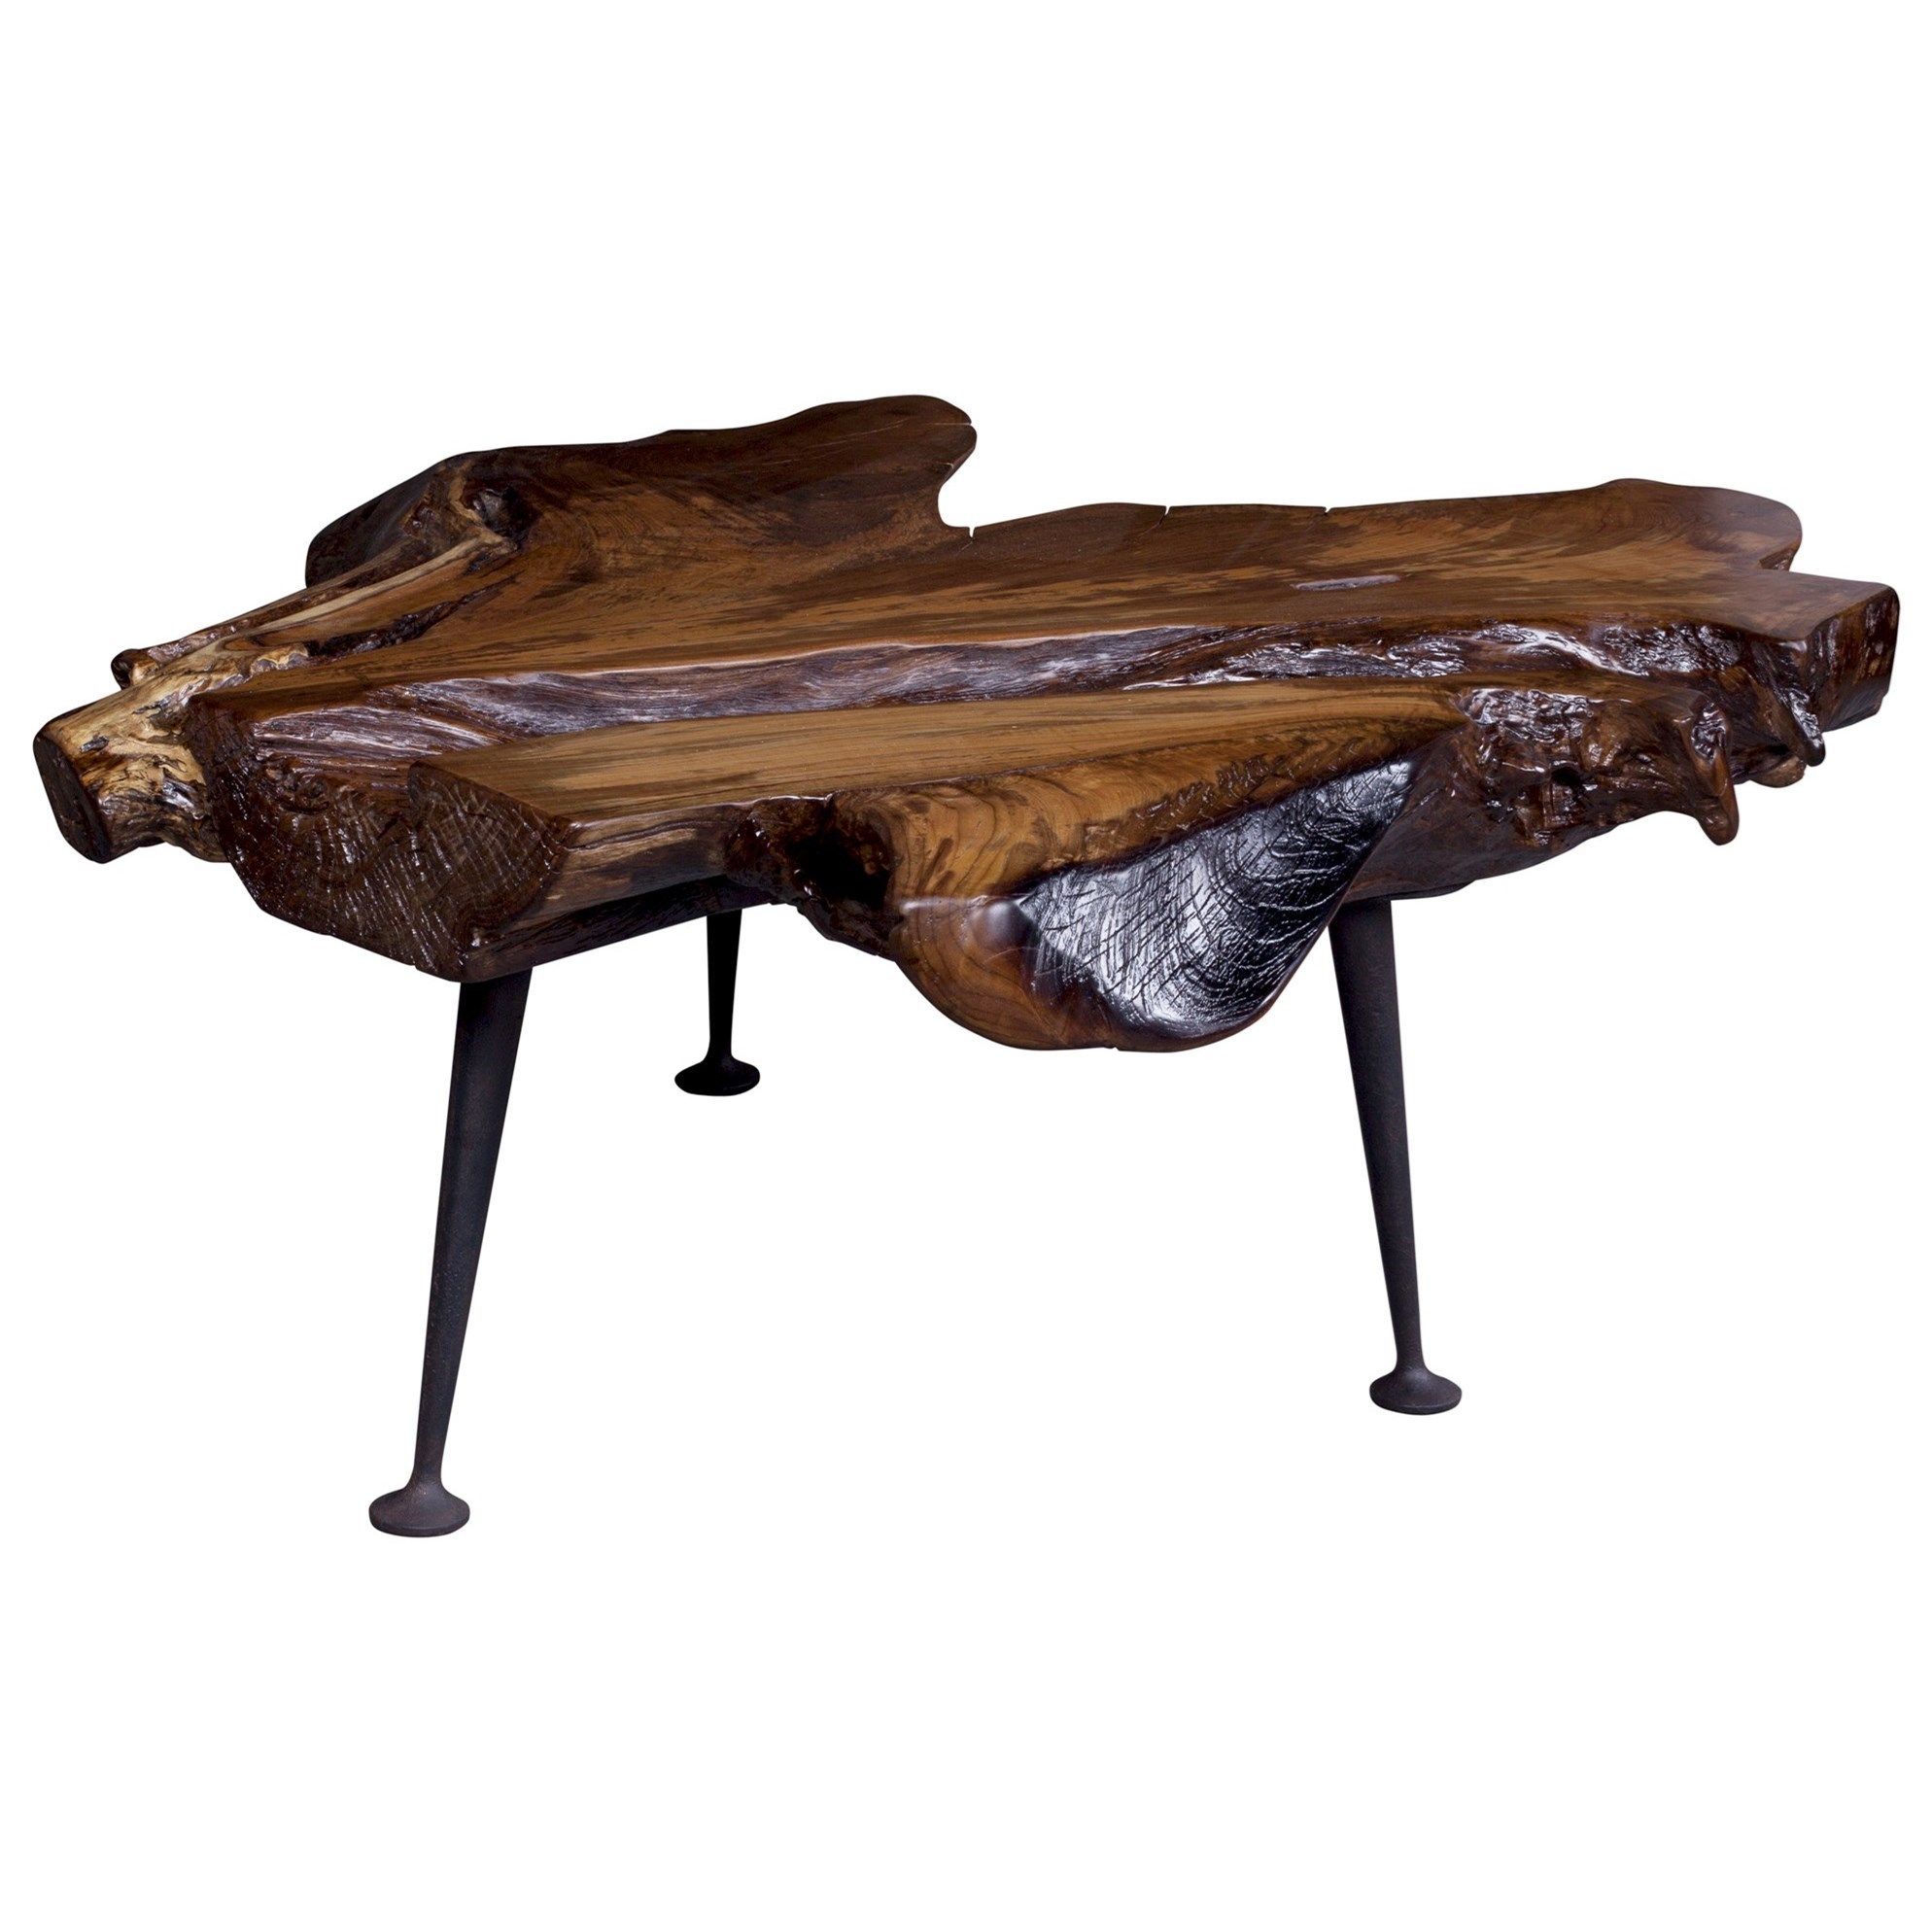 Natural Rustic Live Edge Solid Teak Coffee Table With Cast Iron Legs |  Bennett's Furniture And Mattresses | Cocktail/coffee Tables Intended For Iron Legs Coffee Tables (View 14 of 20)